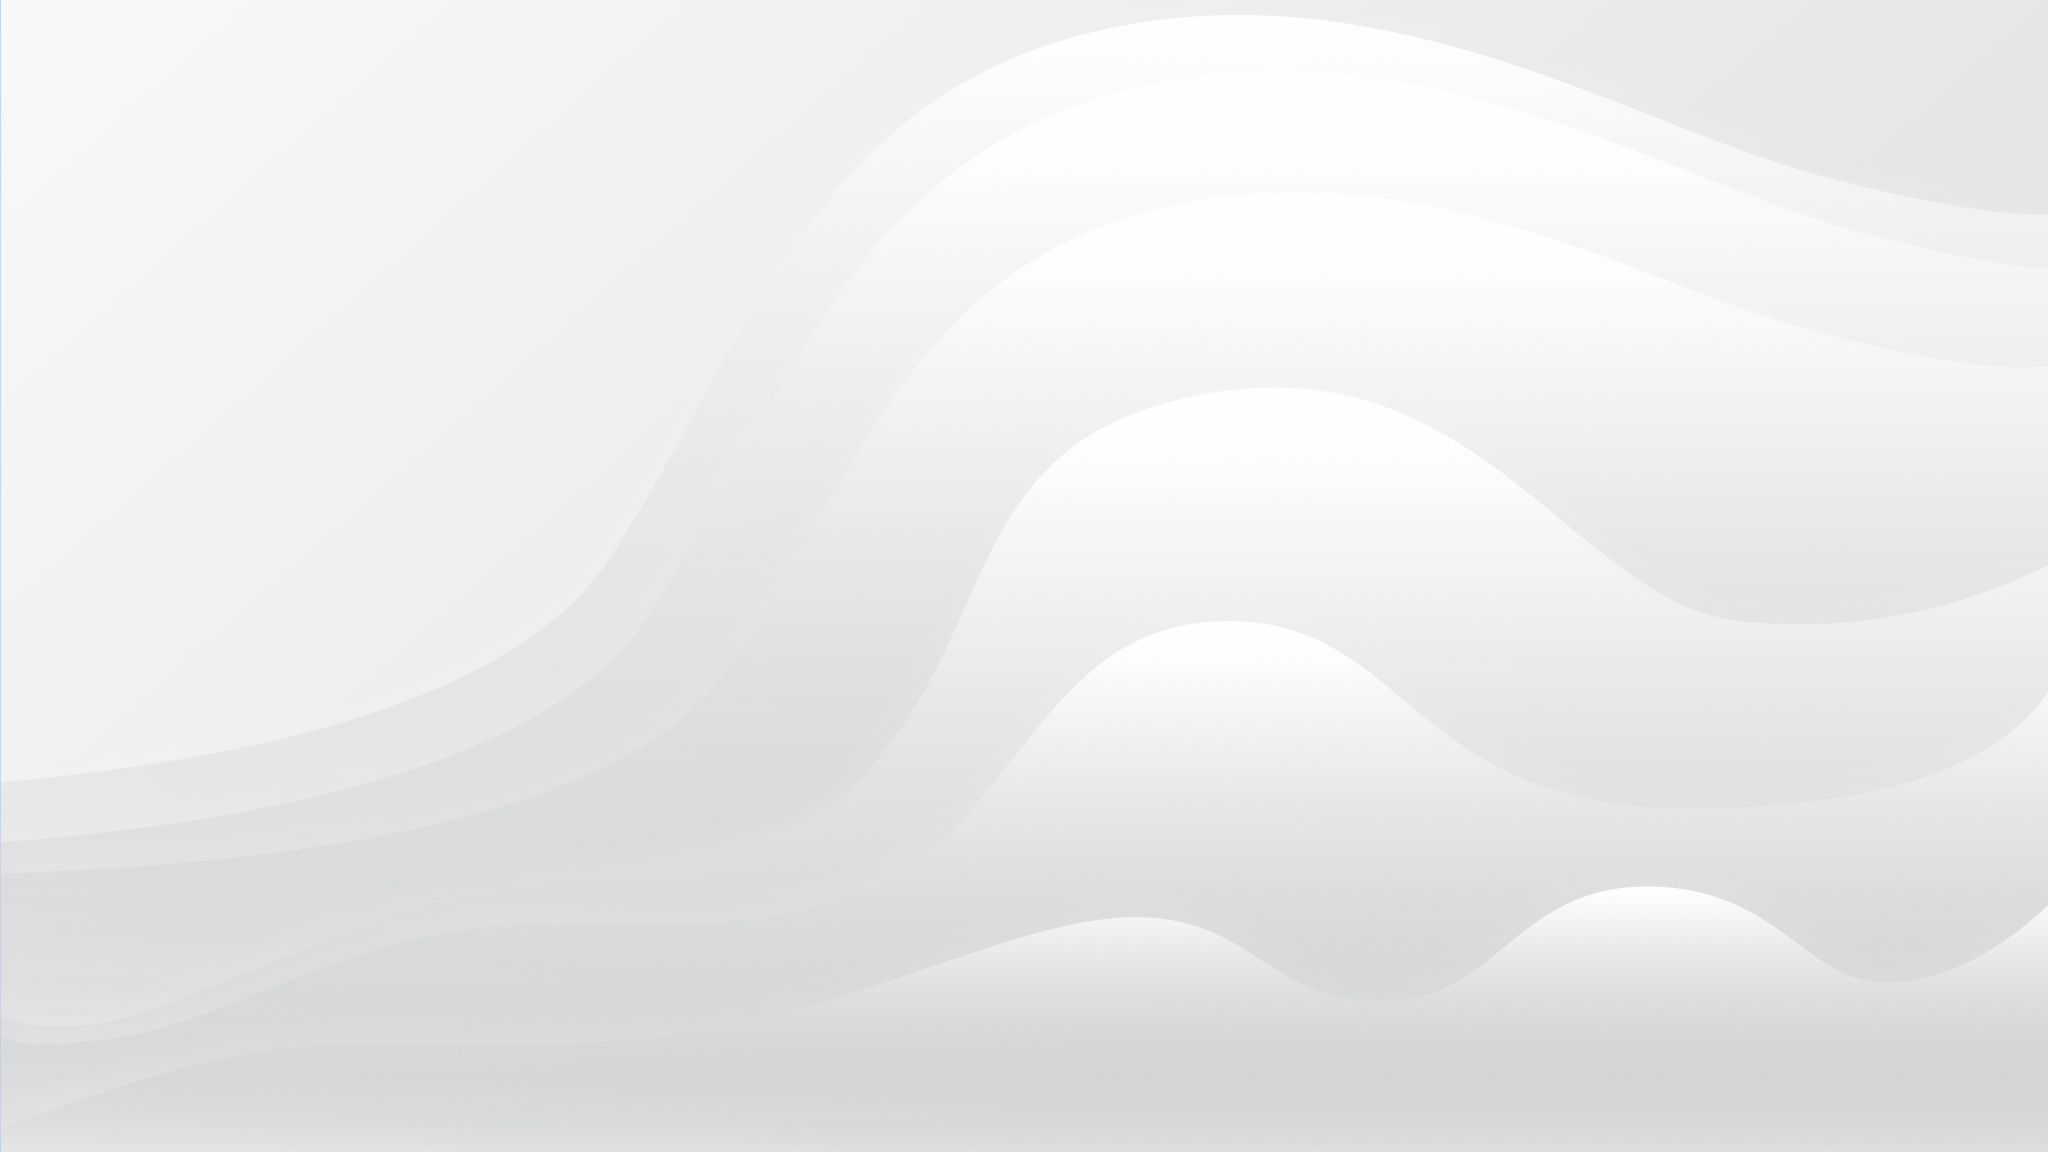 Abstract Wavy Lines Simple Background Minimalism 2048x1152